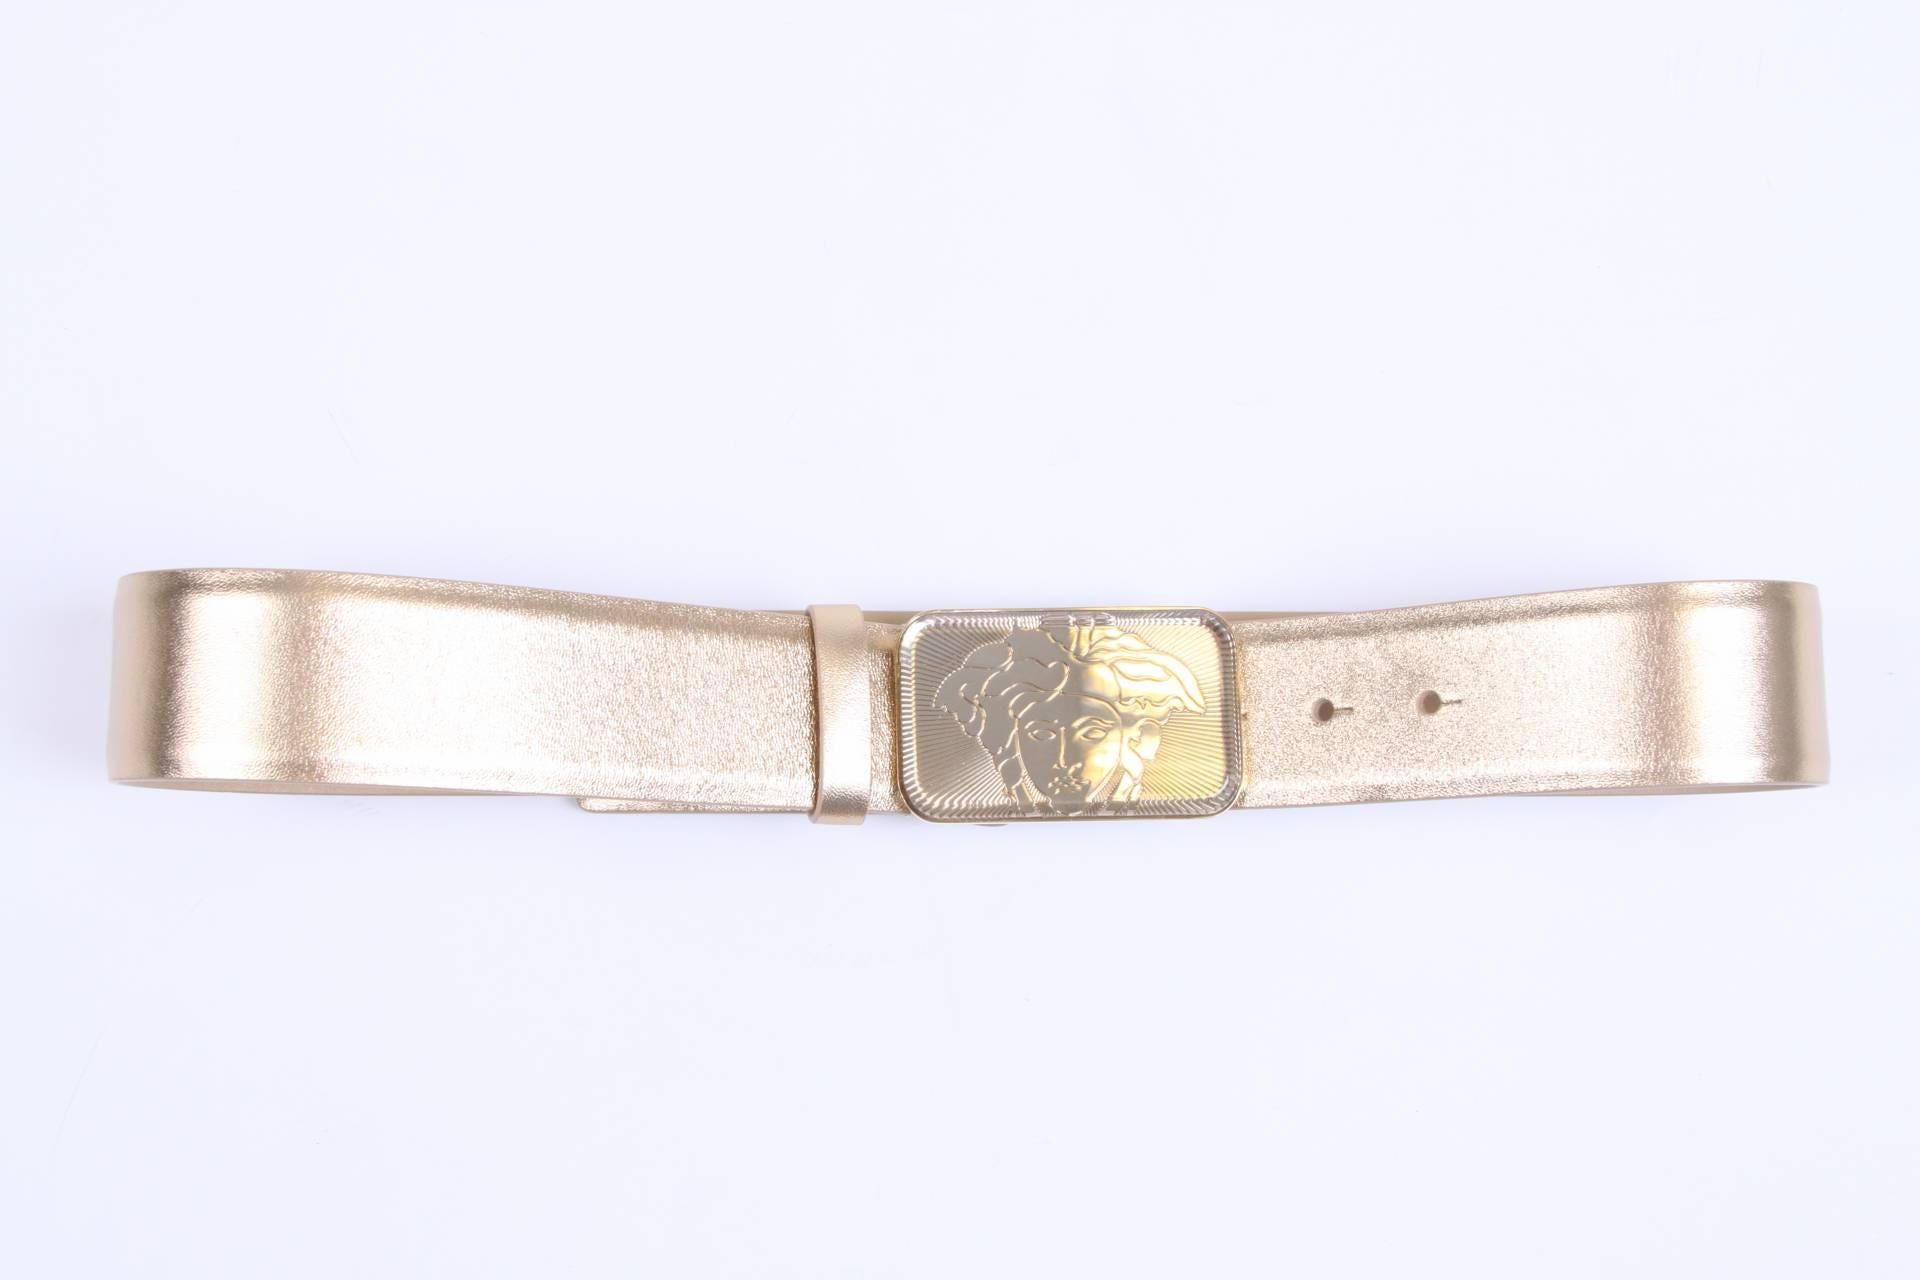 Brand: Versace

Material: gold-tone leather

Buckle: gold-tone square with a translucent Medusa 

Length: 85 cm

Width: 4,5 cm

Condition (1/10): 10, new!

We do have a matching bag with this belt!